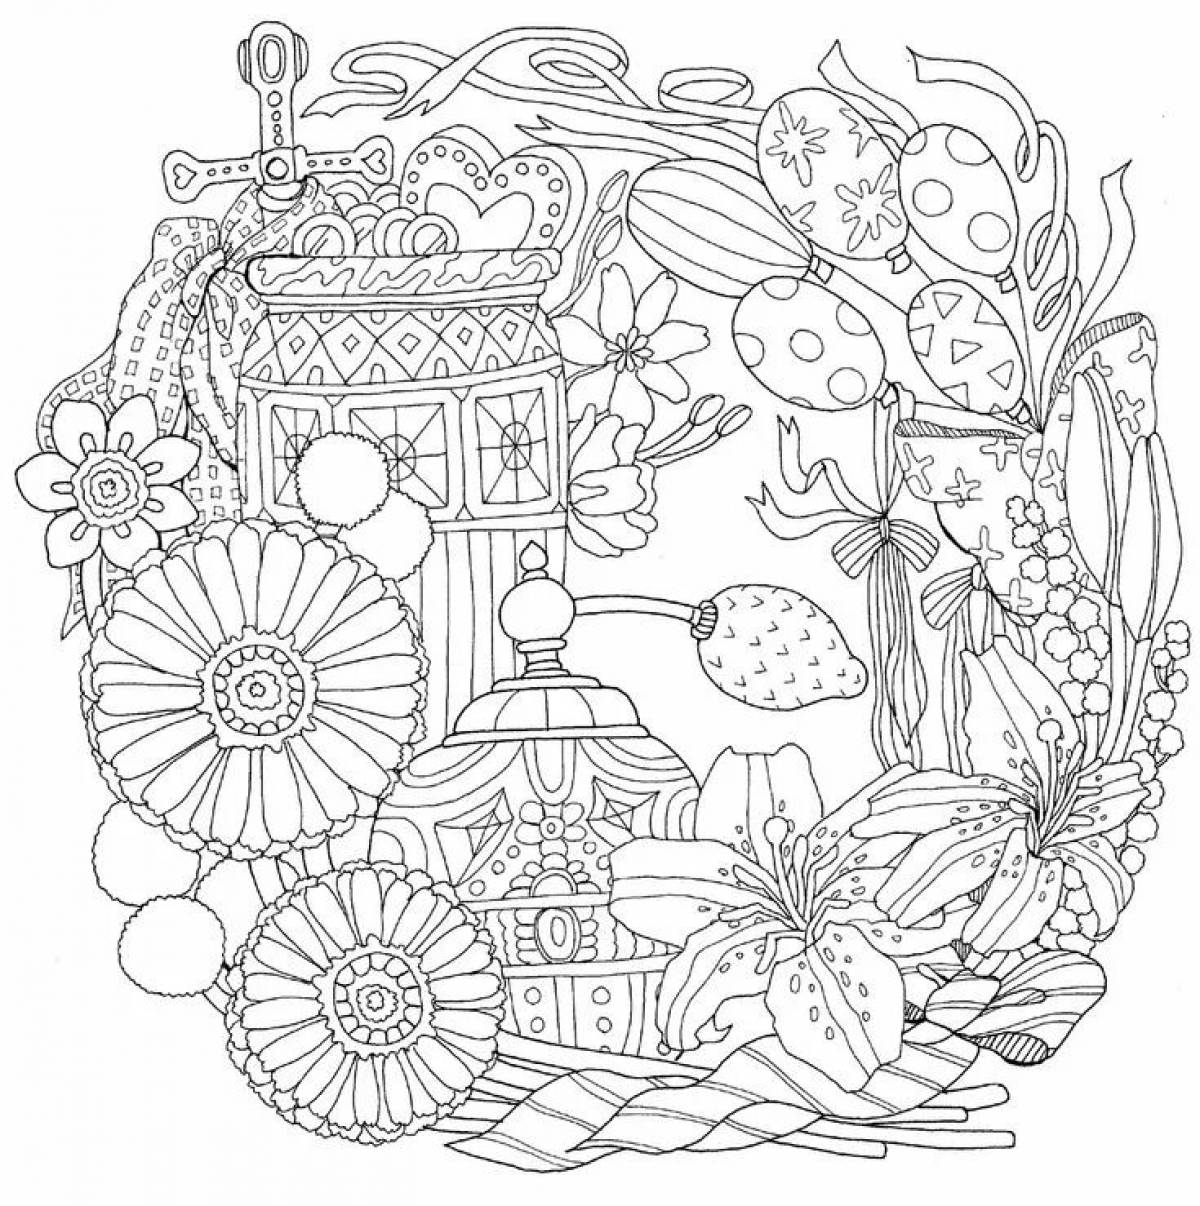 Coloring-inspiration coloring page